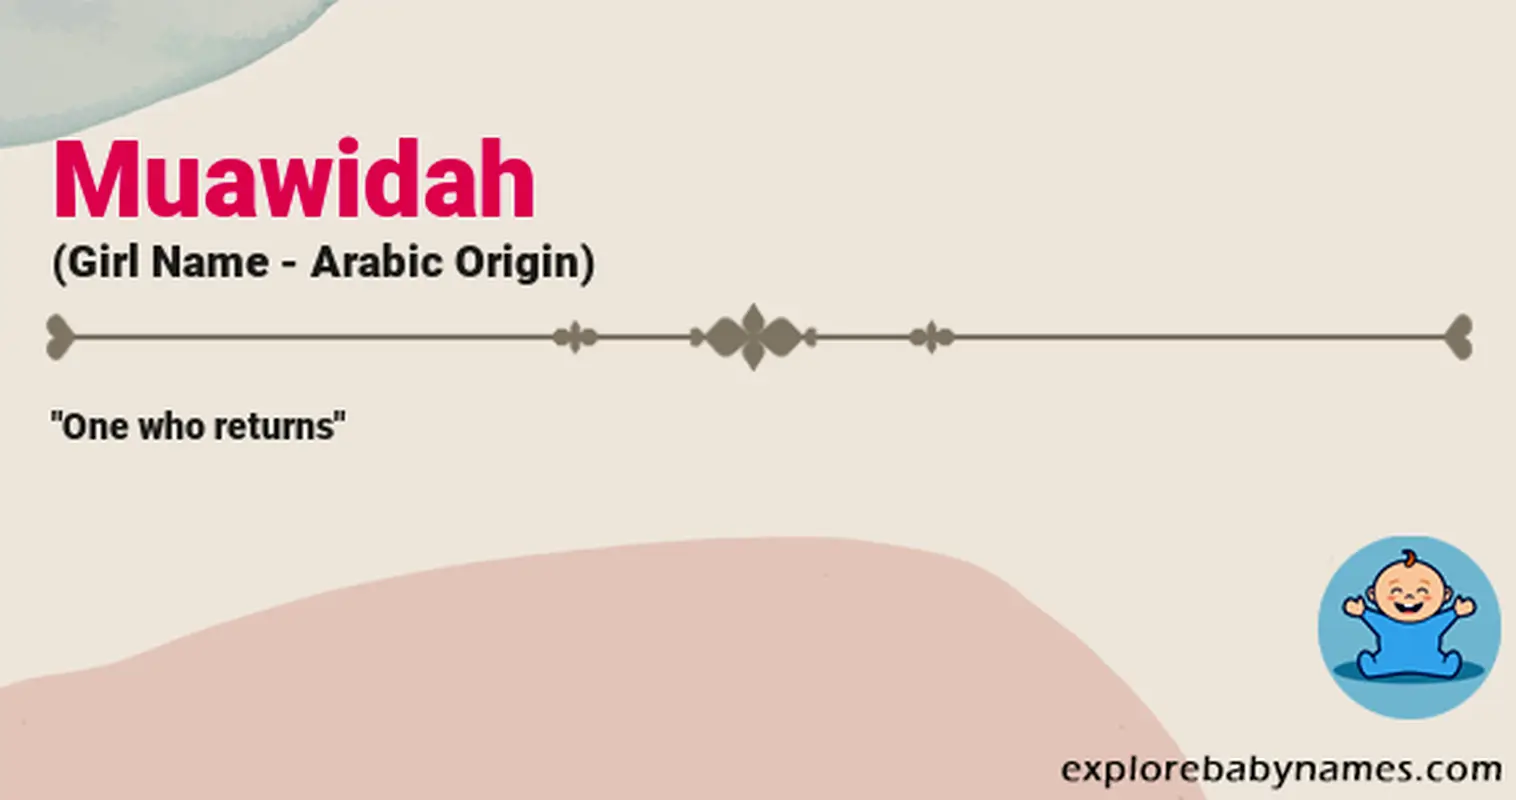 Meaning of Muawidah